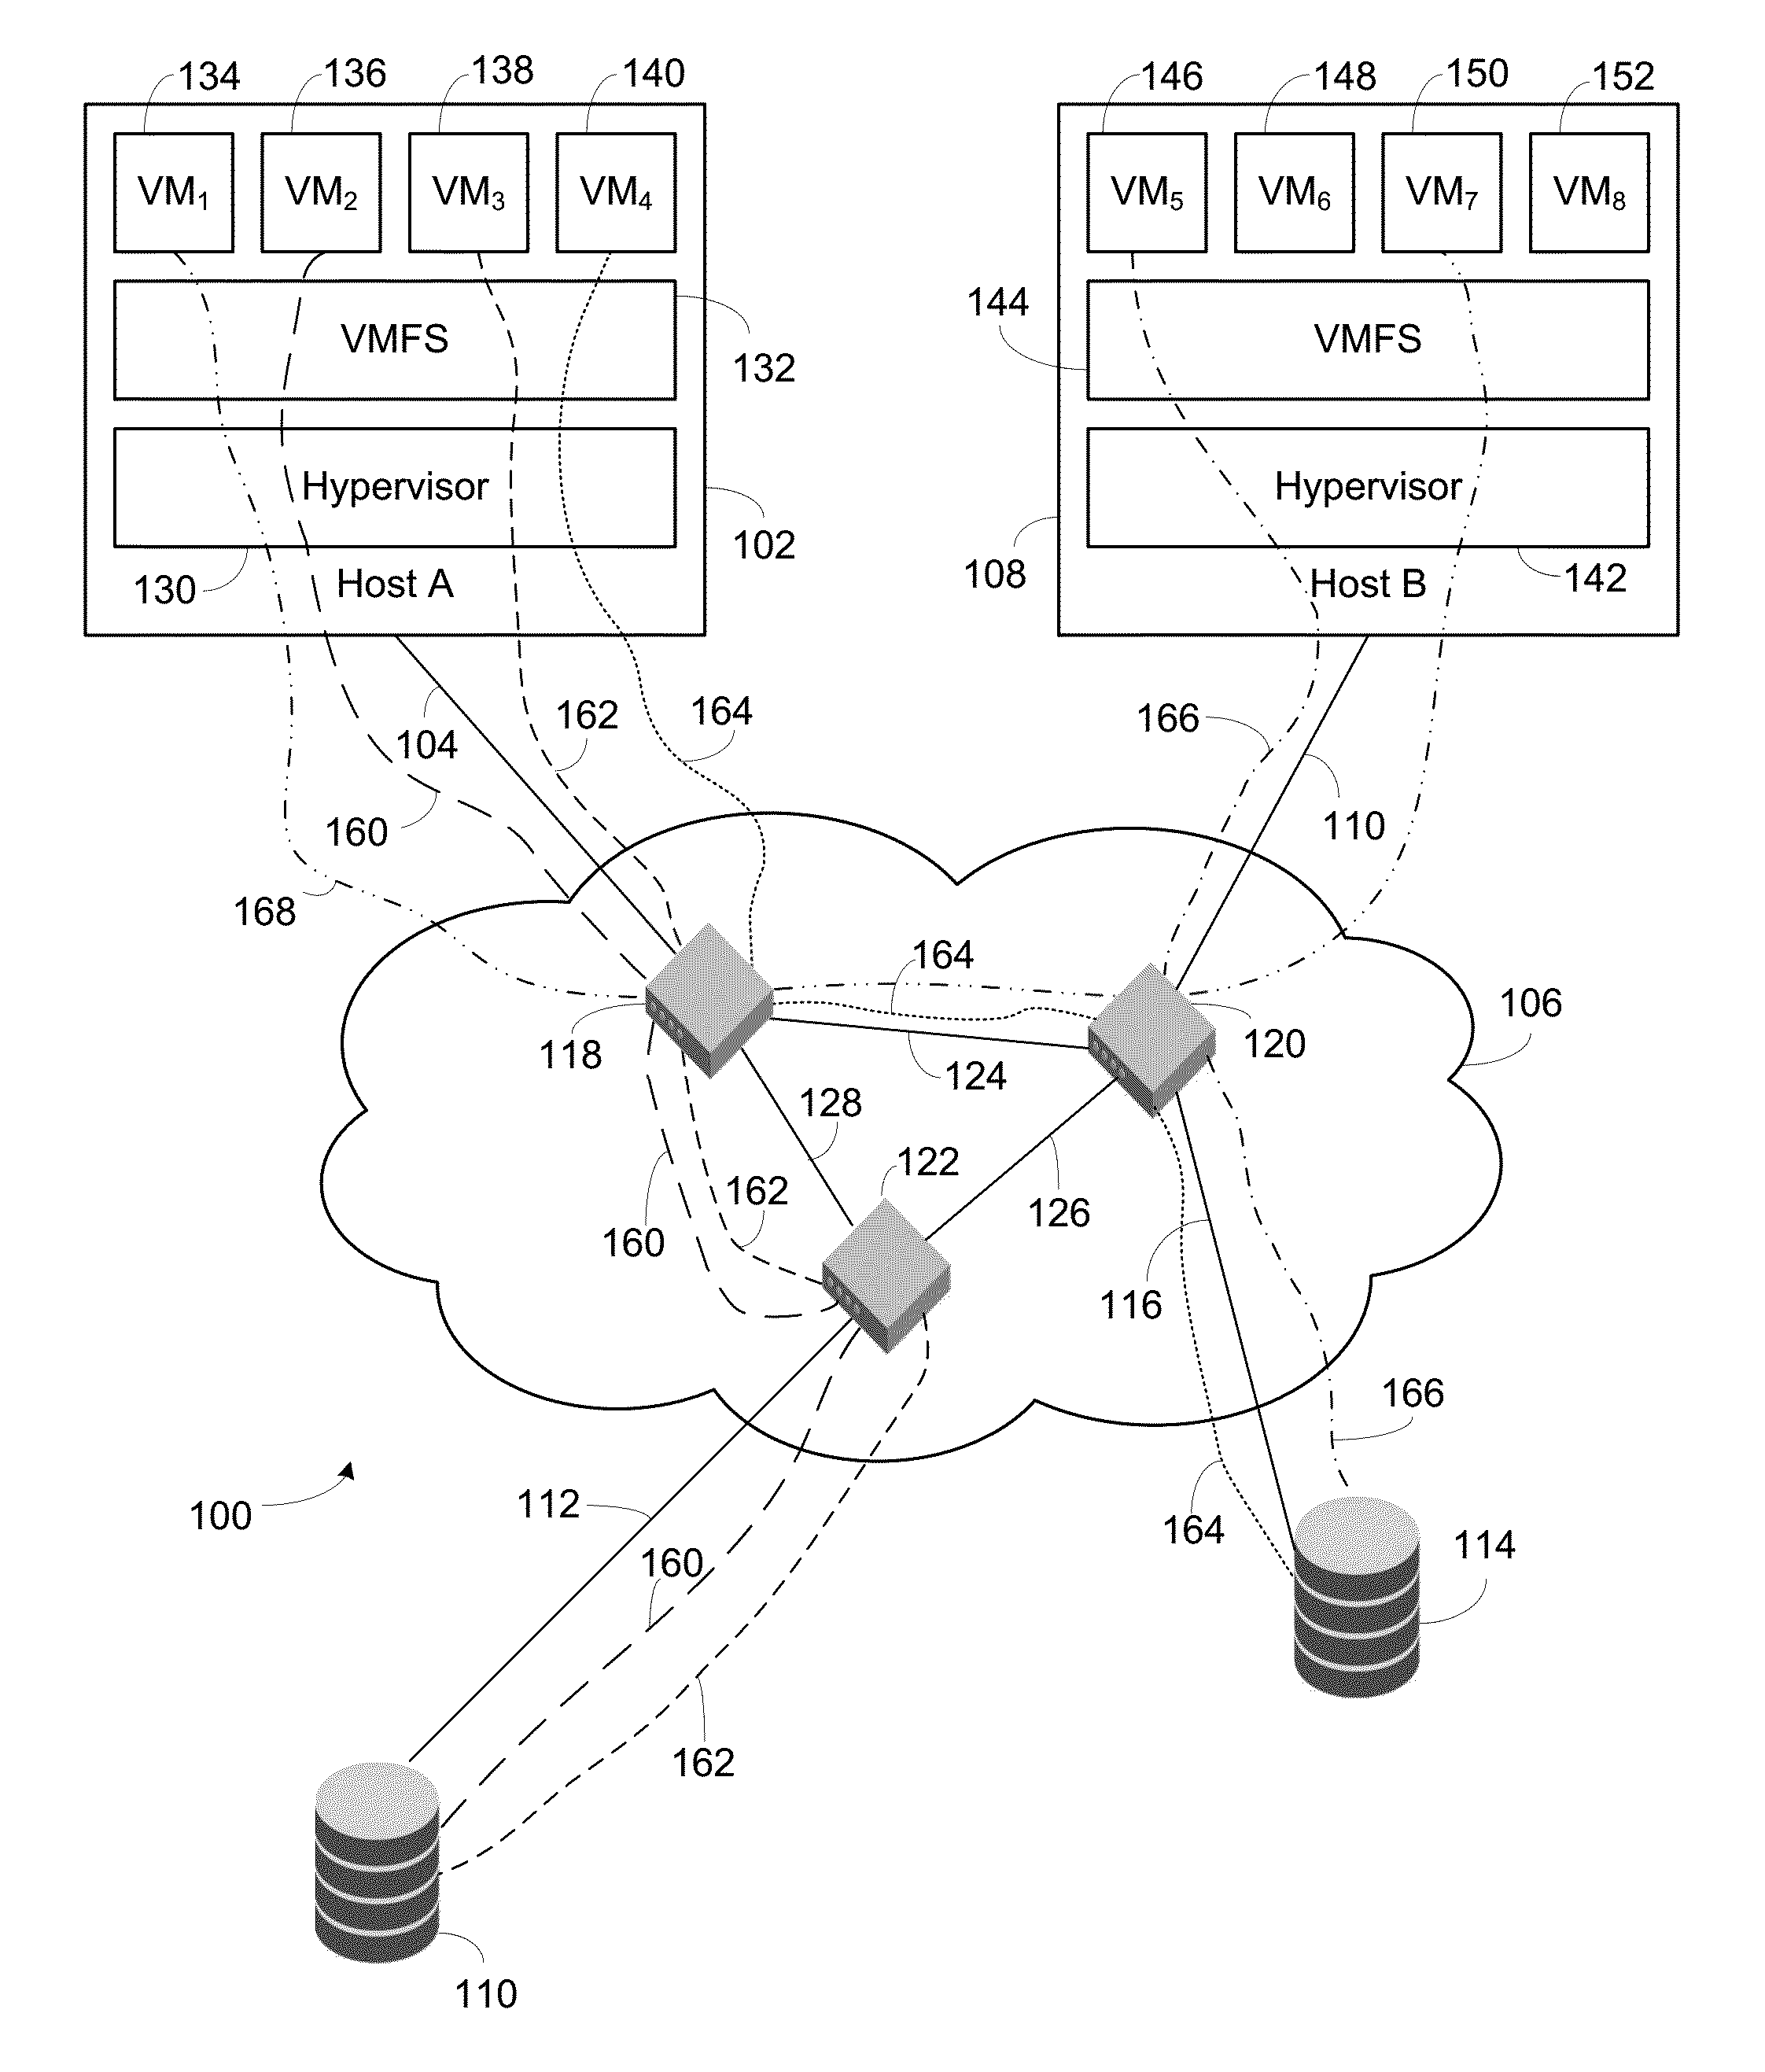 Method and Apparatus for Determining the Identity of a Virtual Machine